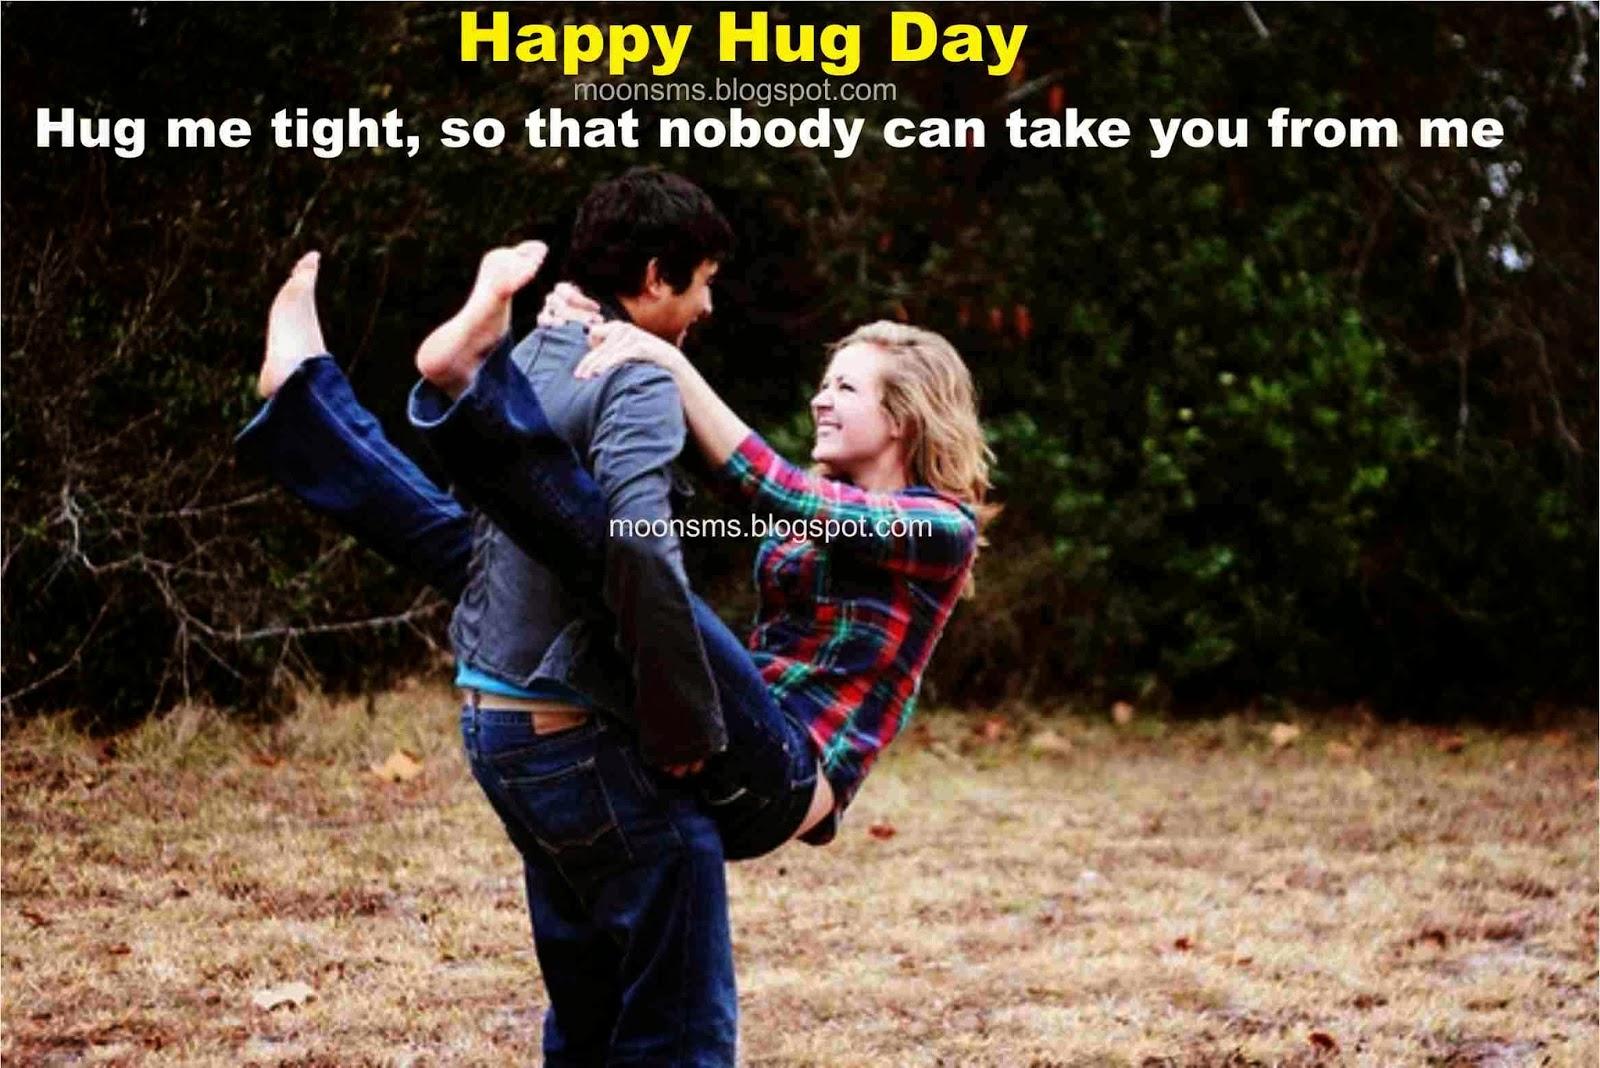 Happy Hug Day Quotes Sayings Messages Pics Wallpaper 1